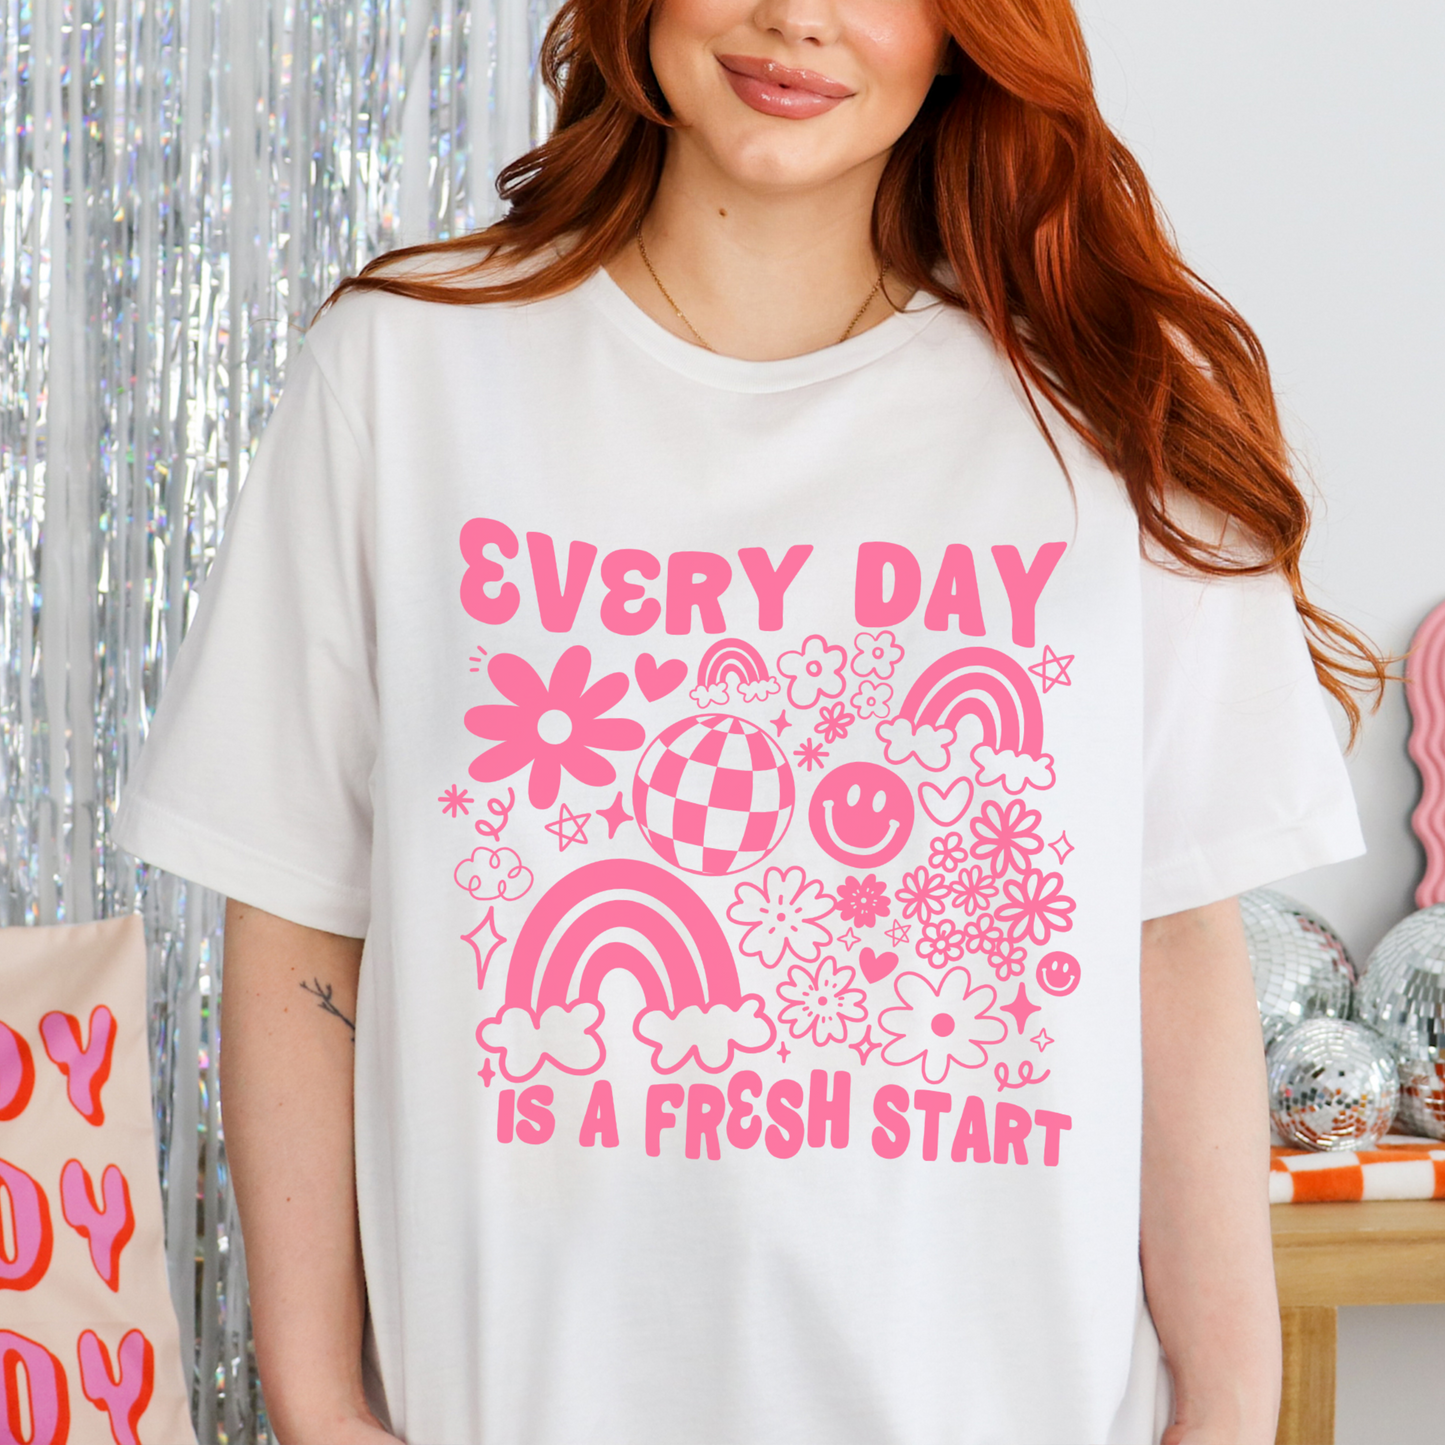 Every Day Is A Fresh Start - Screen Print Transfer (PRE-ORDER SHIPS JUL 31st - AUG 4th)